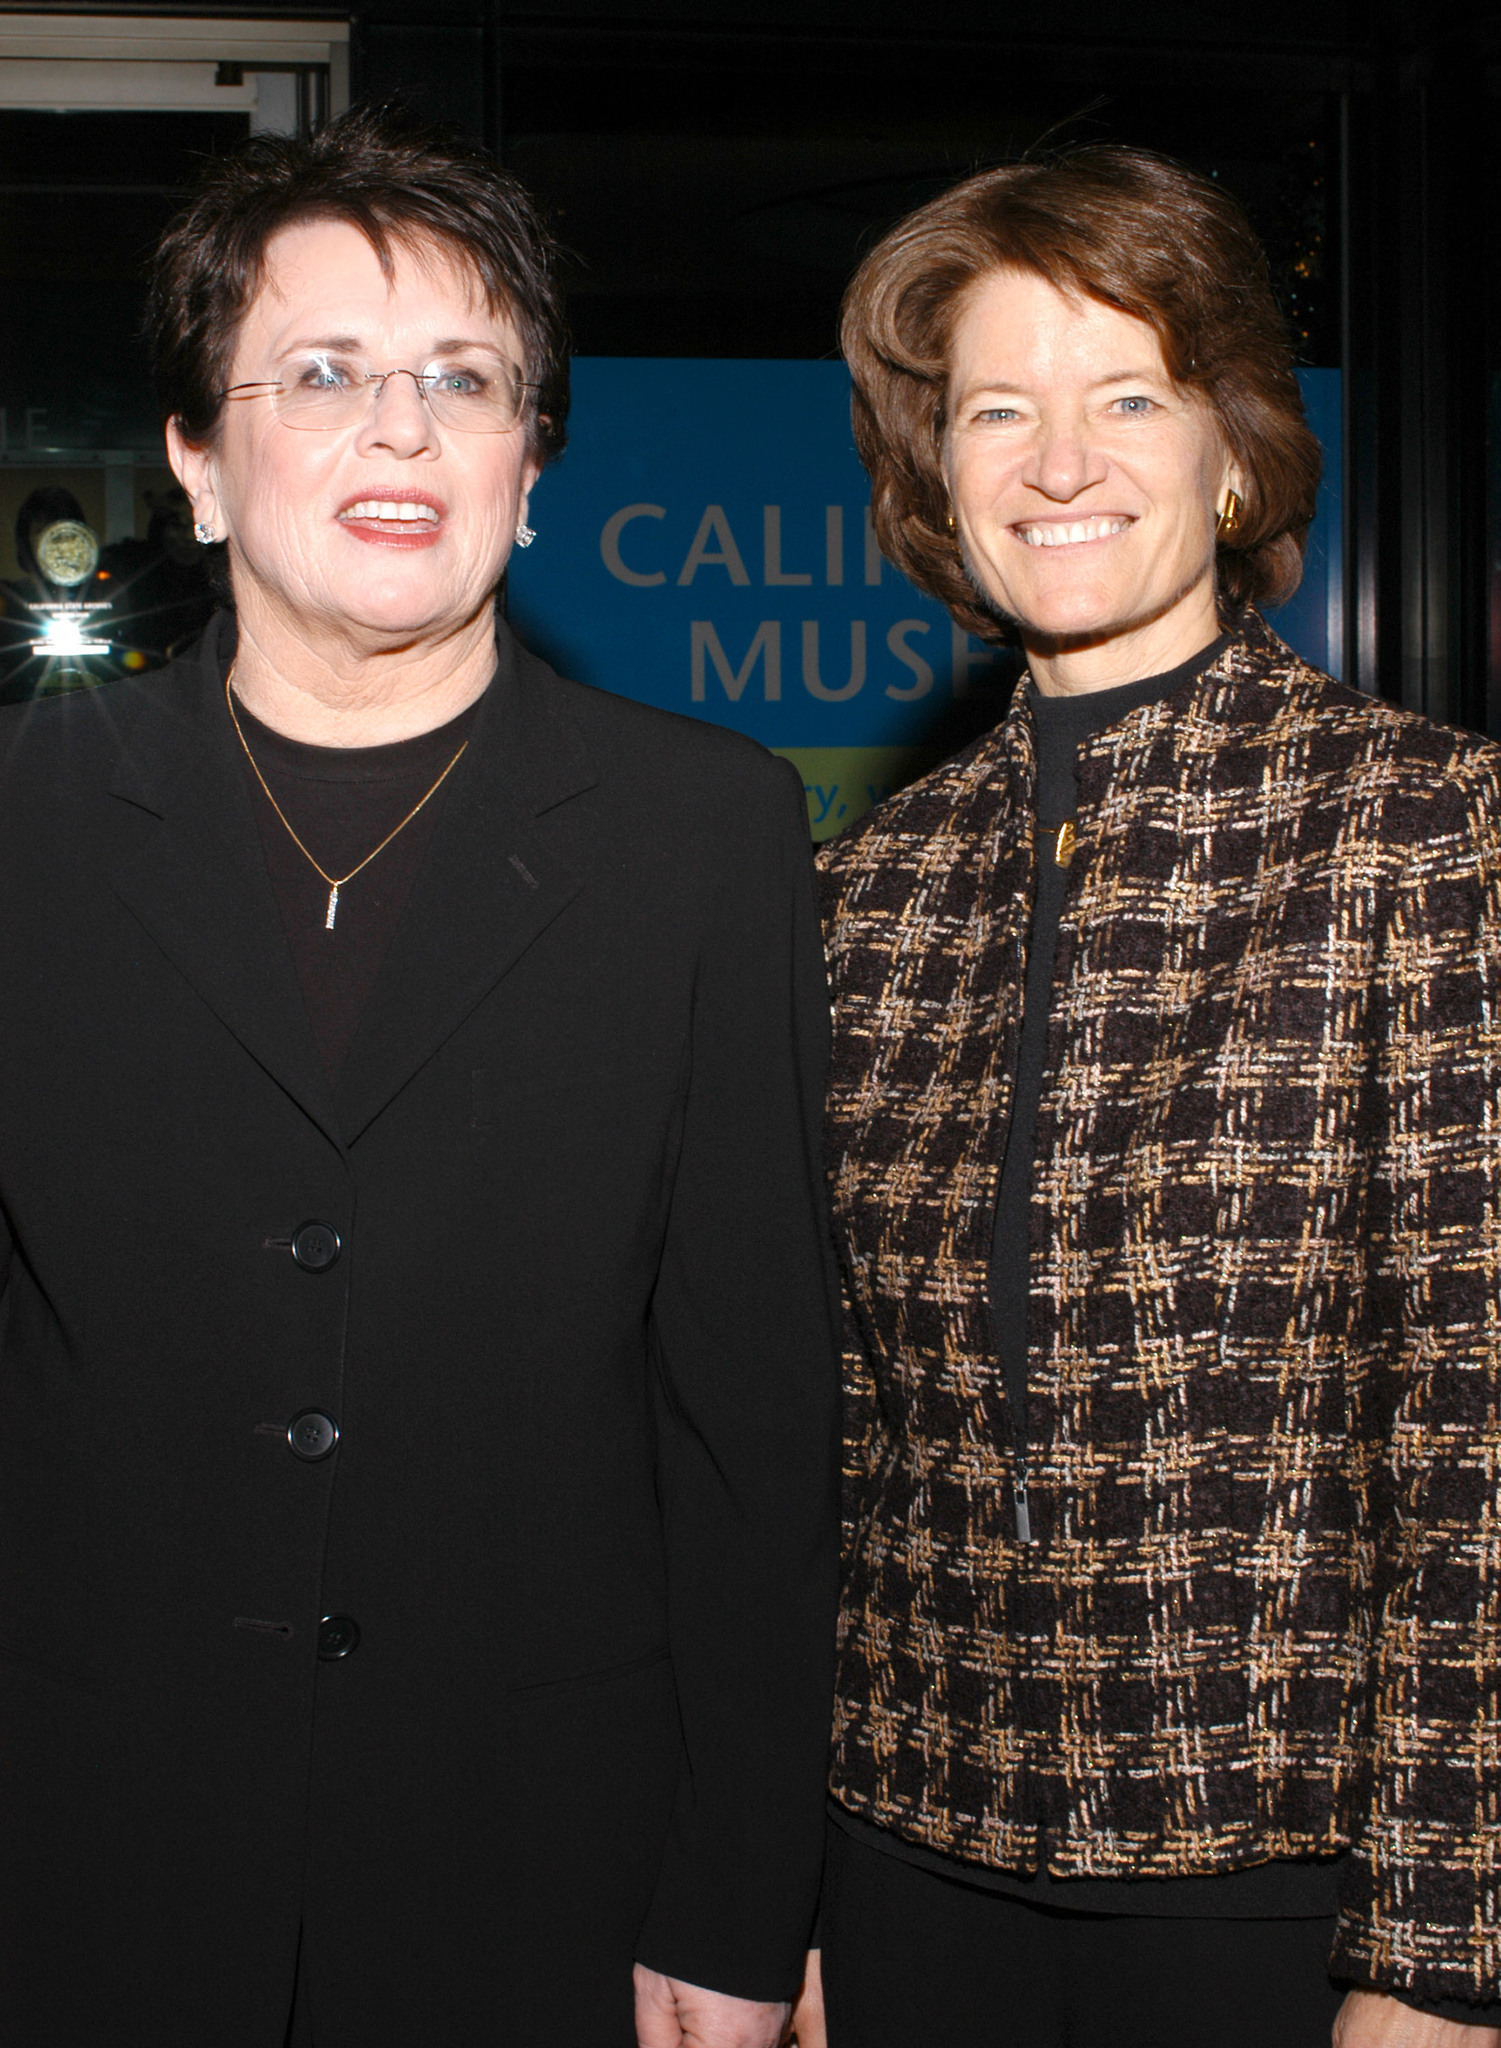 Sally Ride and Billie Jean King